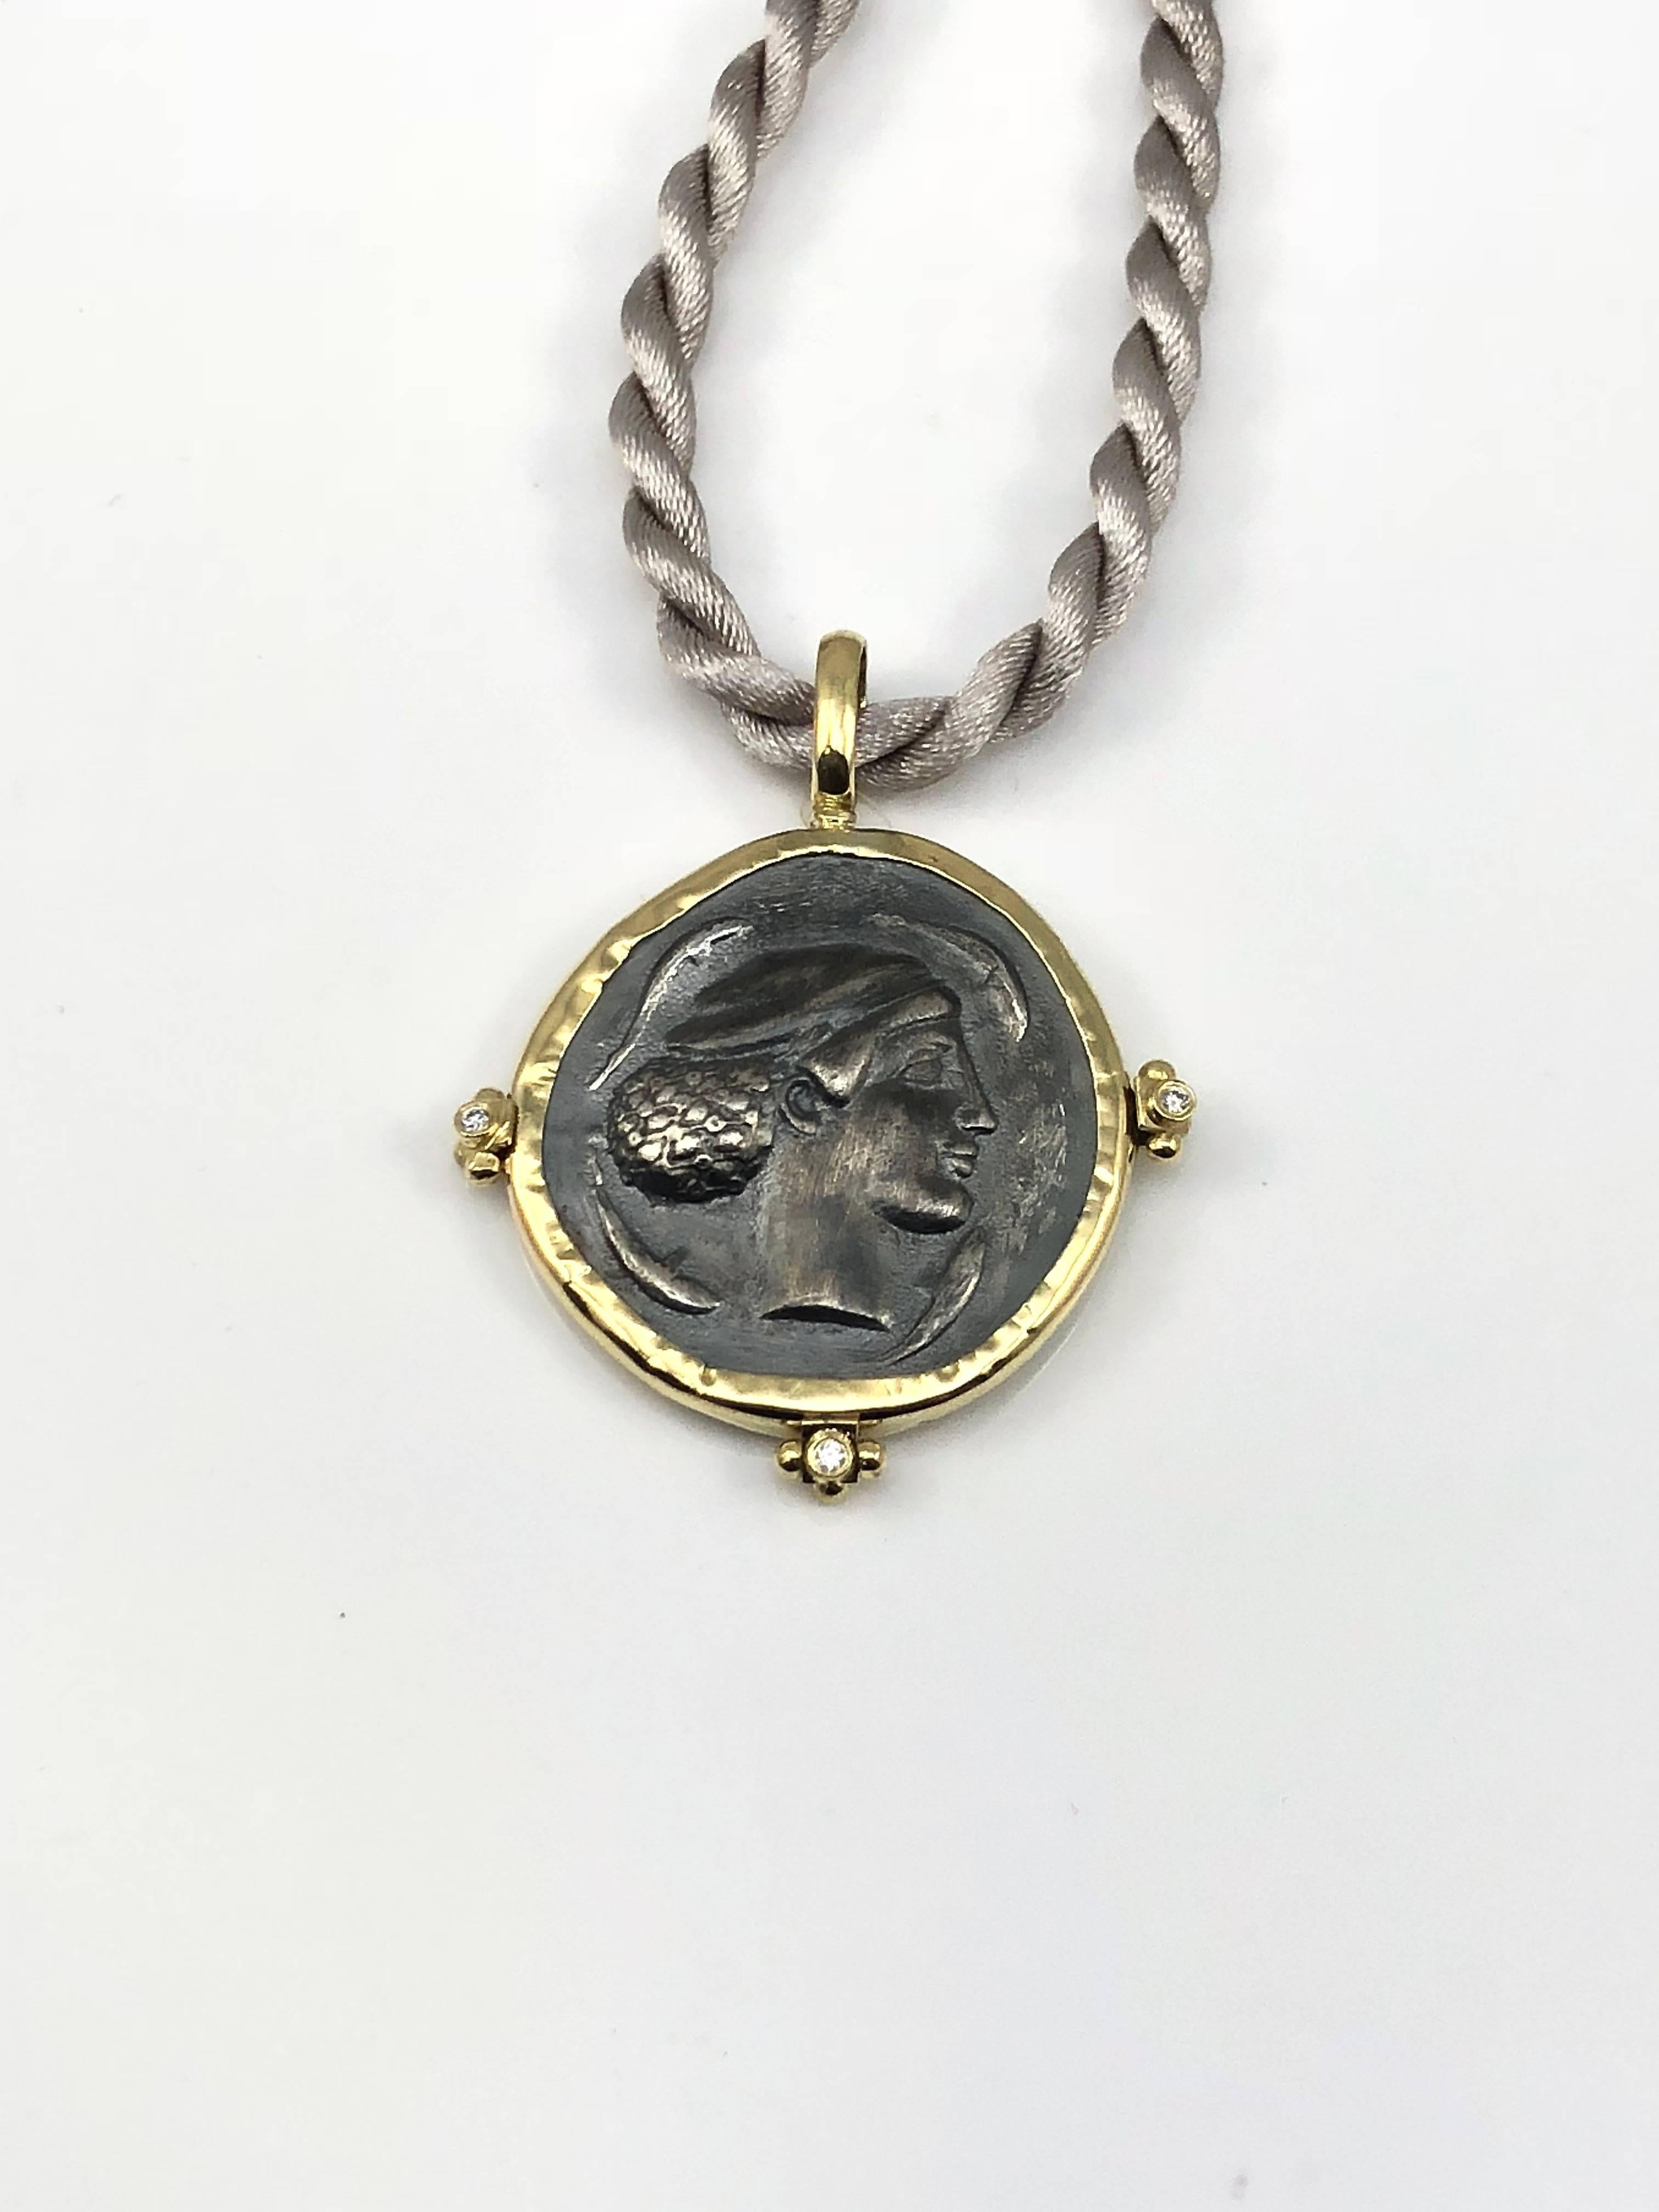 S.Georgios designer 18 Karat Yellow Gold handmade Pendant Necklace featuring 3 Brilliant cut Diamonds total weight of 0.03 Carat and a replica of an Ancient Greek Dimitra Coin in Silver 925. The coin has a beautiful reverse side and can be worn both